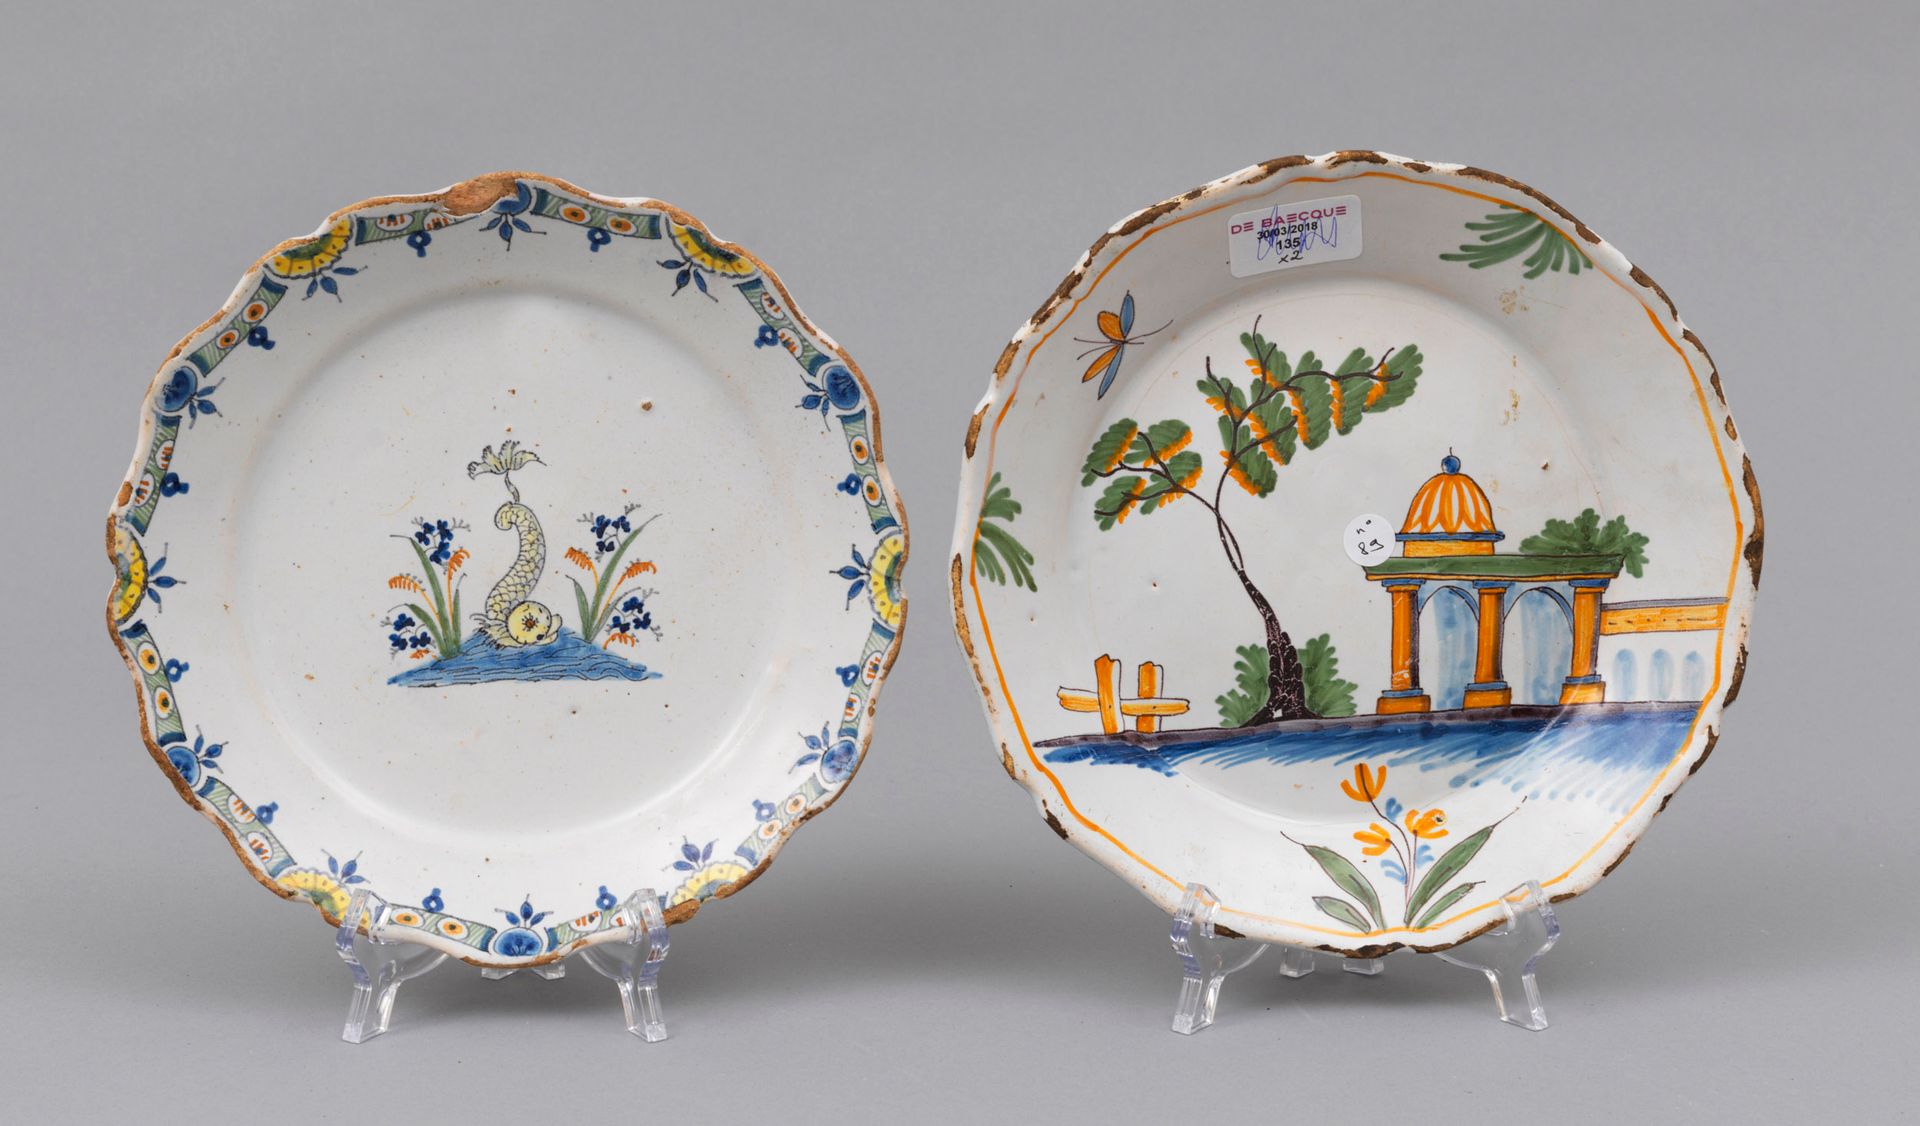 Faience Nevers 
Nevers

Two earthenware plates with contoured edges with polychr&hellip;